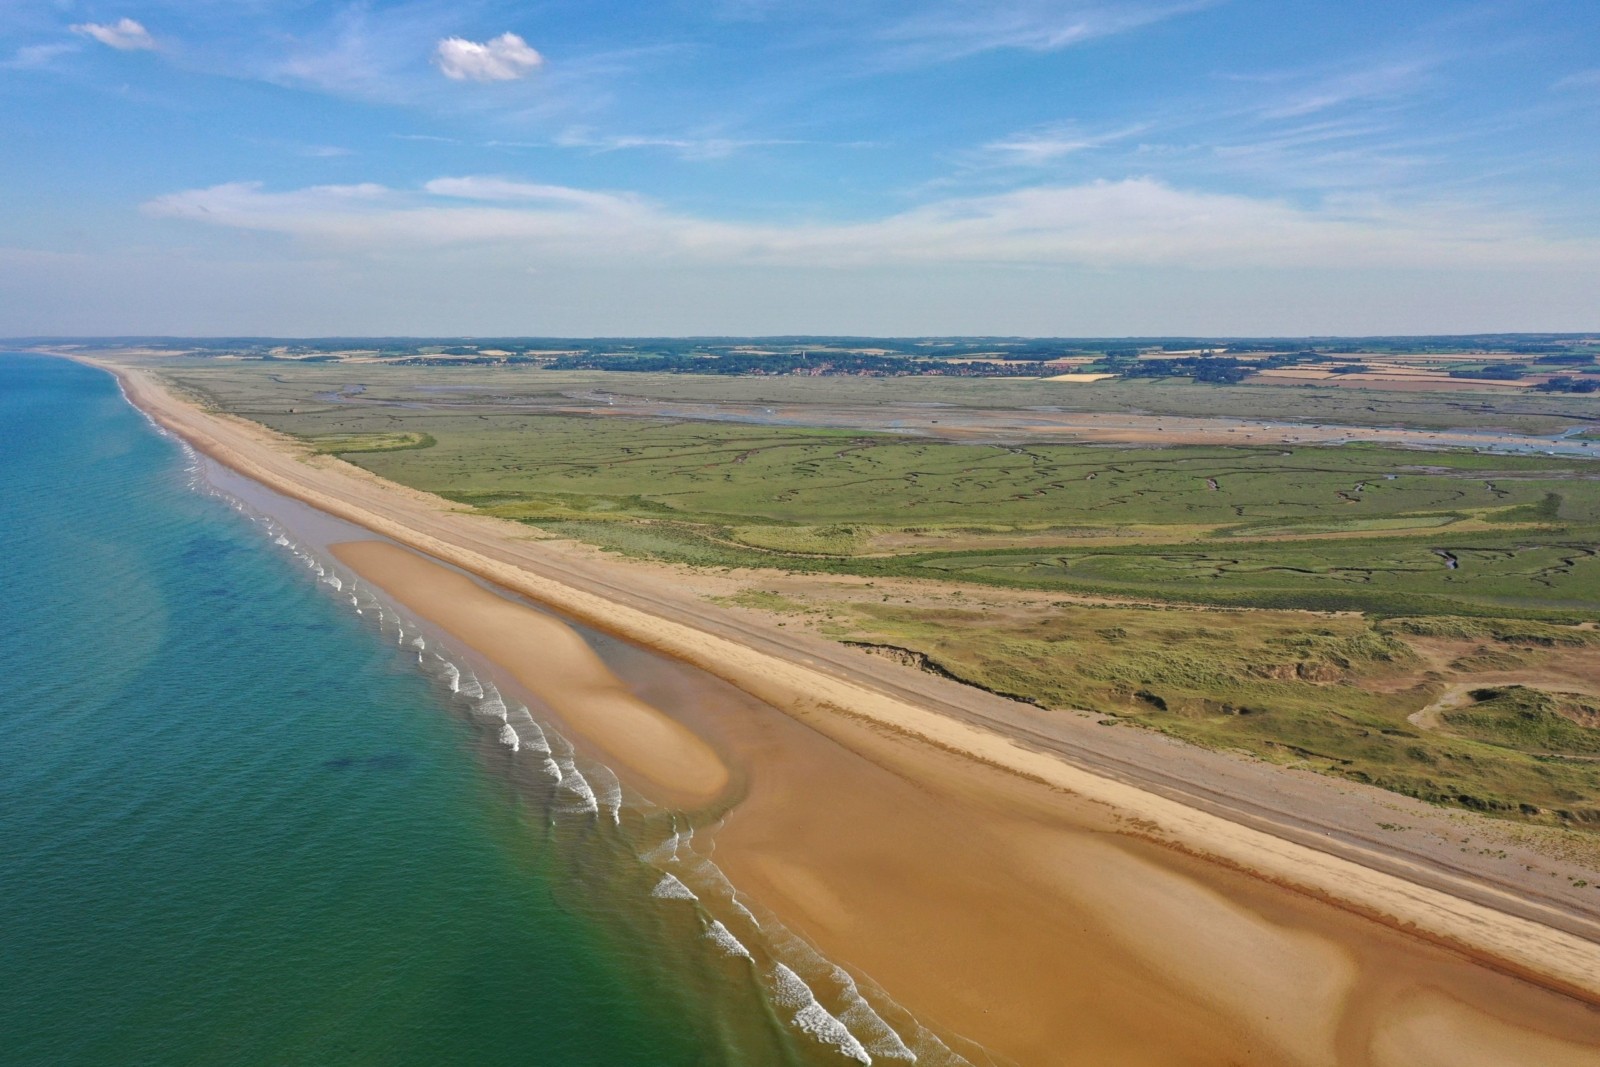 Sediment becomes smaller and sand dunes form as you travel north-west along the spit